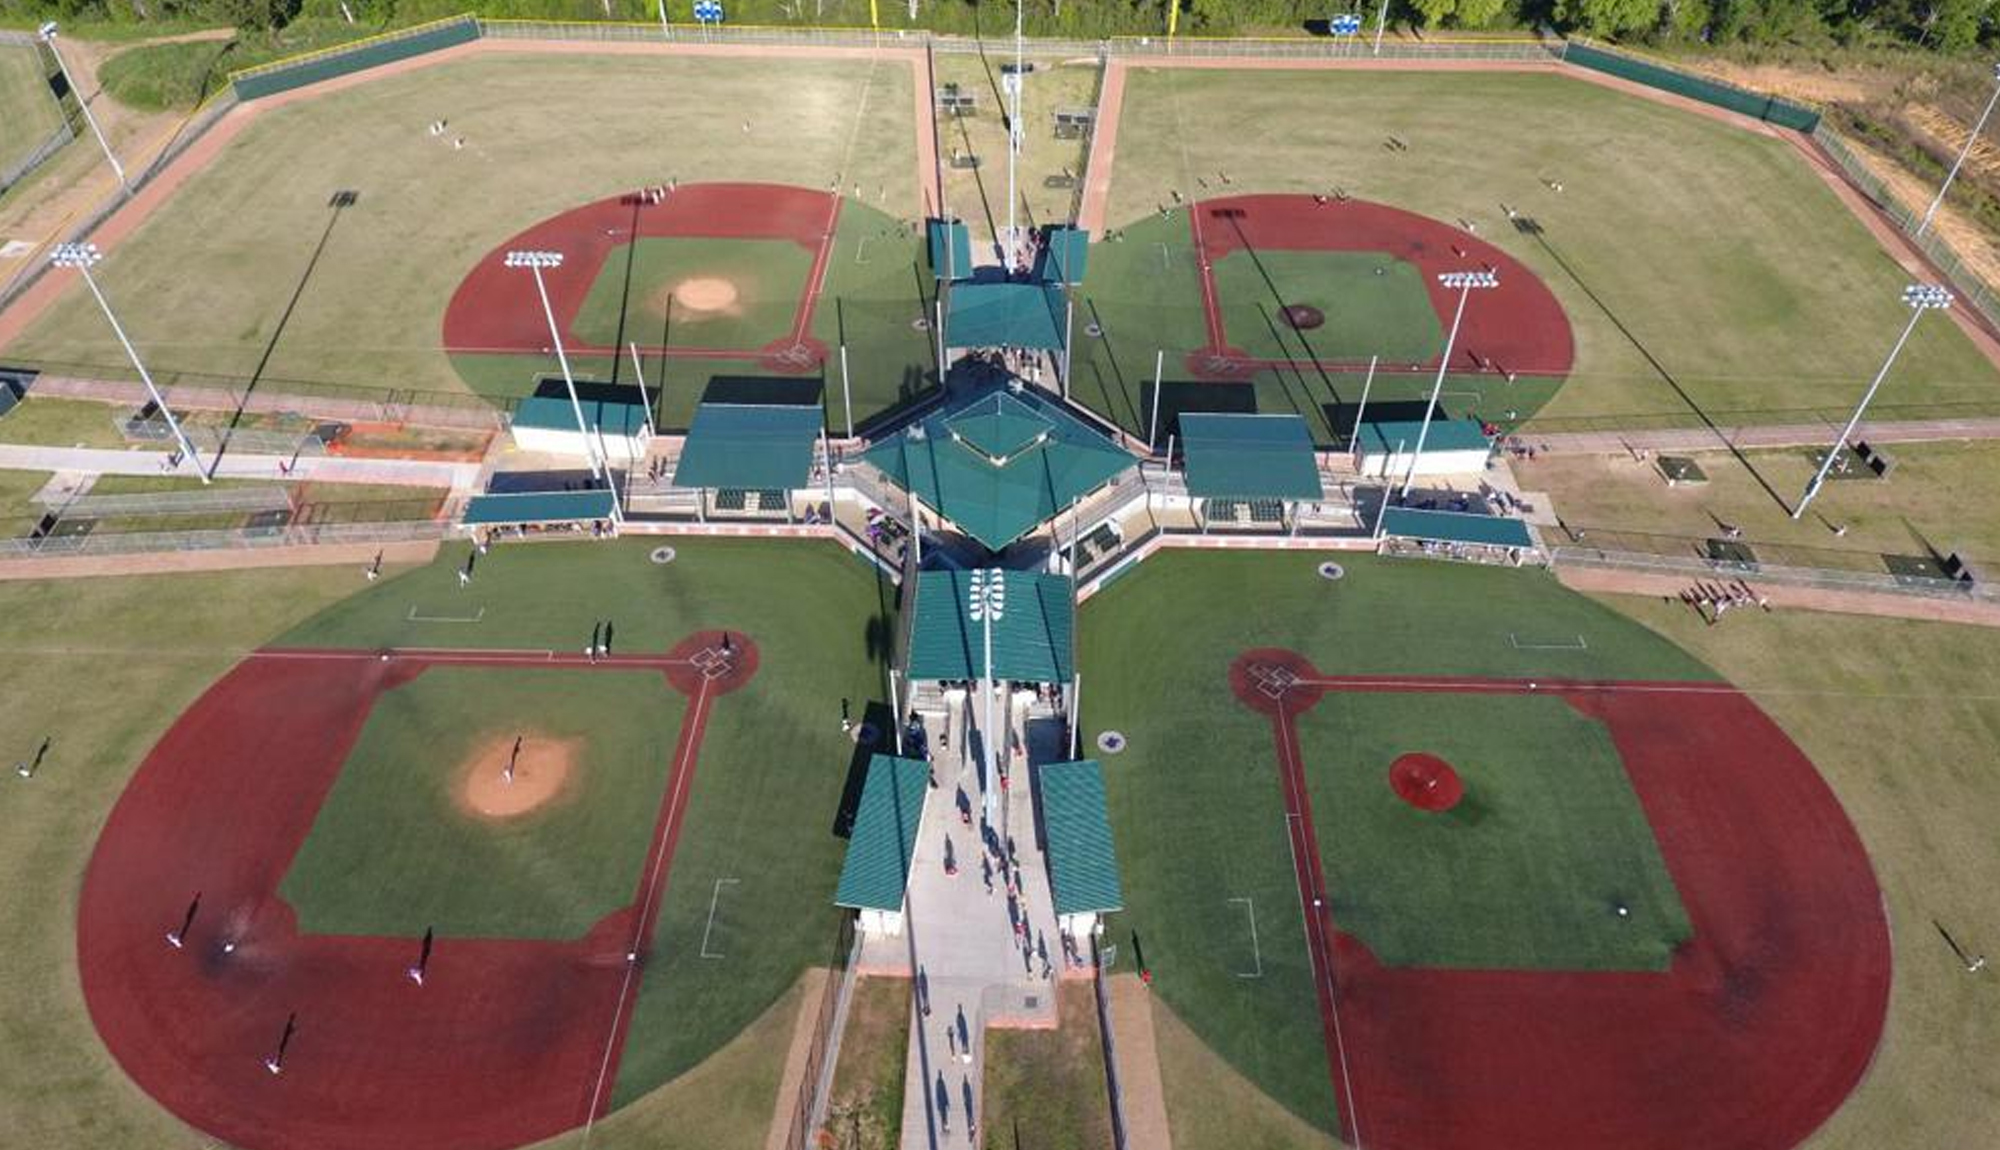 2018 National Underclass South Showcase Event Info Perfect Game